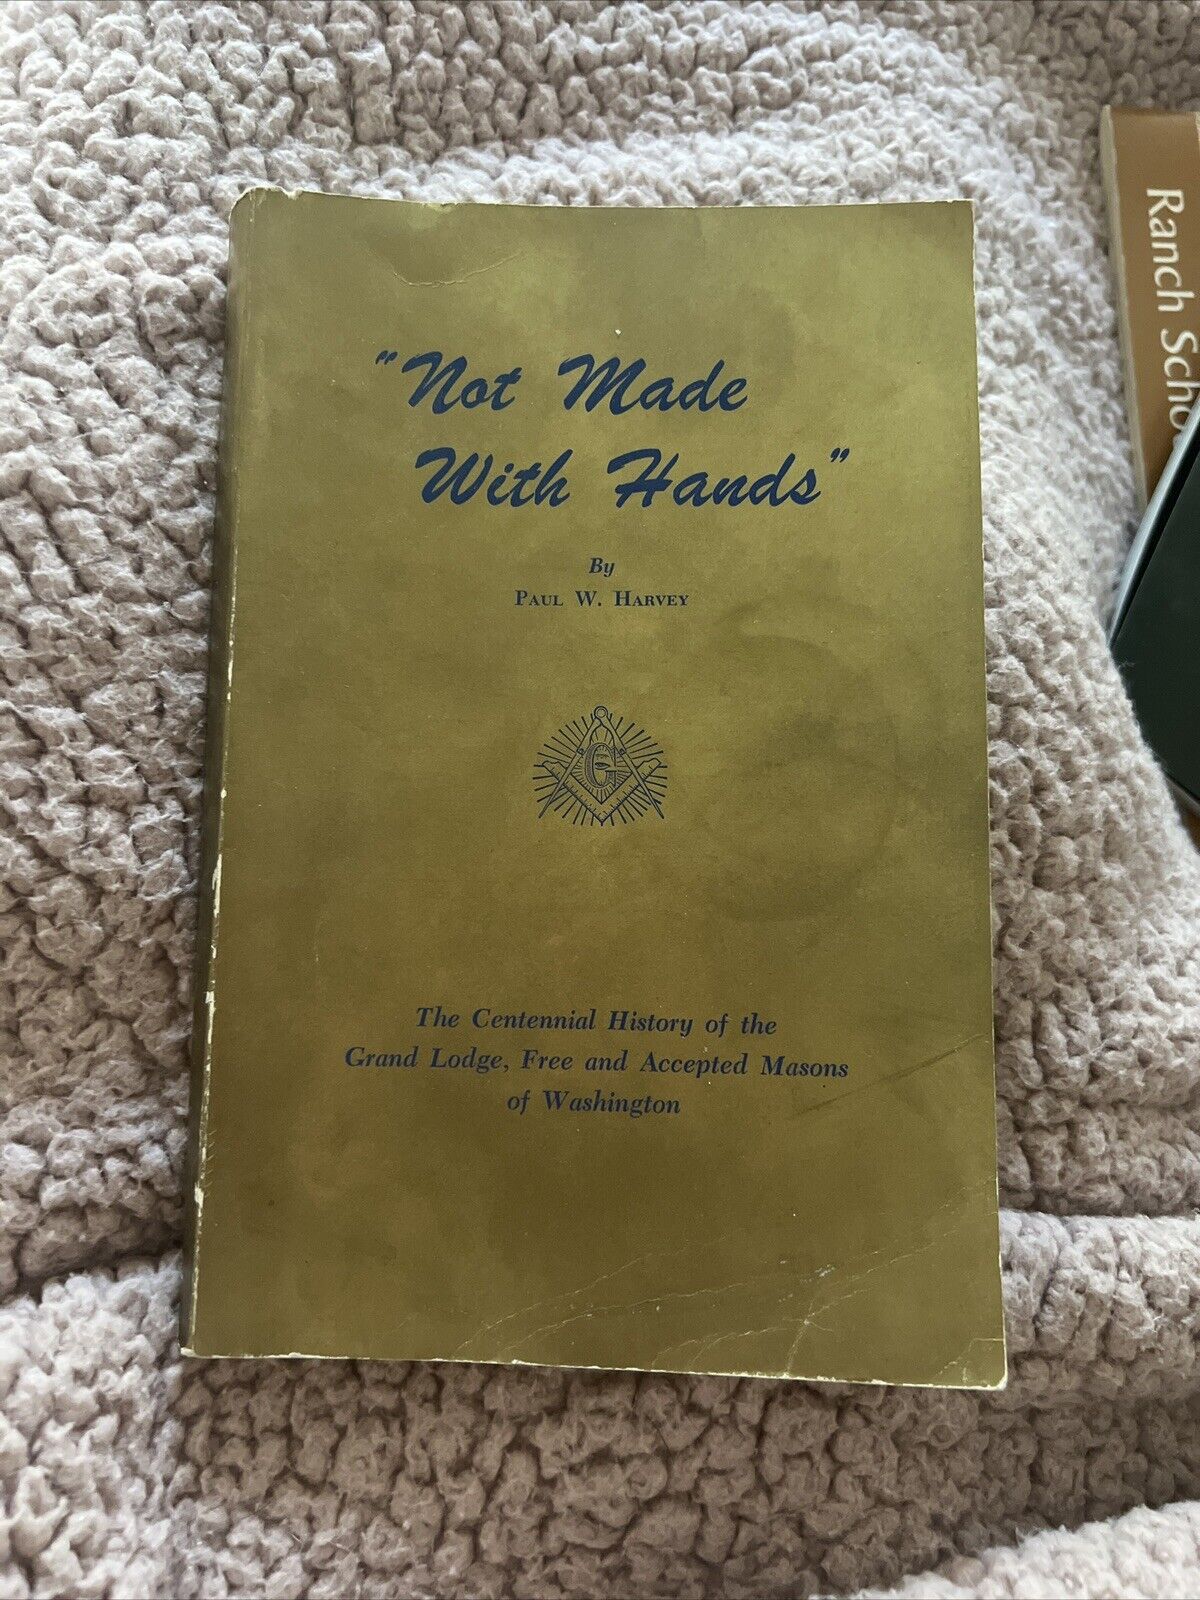 Not Made With Hands By Paul W. Harvey The Centennial History Grand Lodge Free